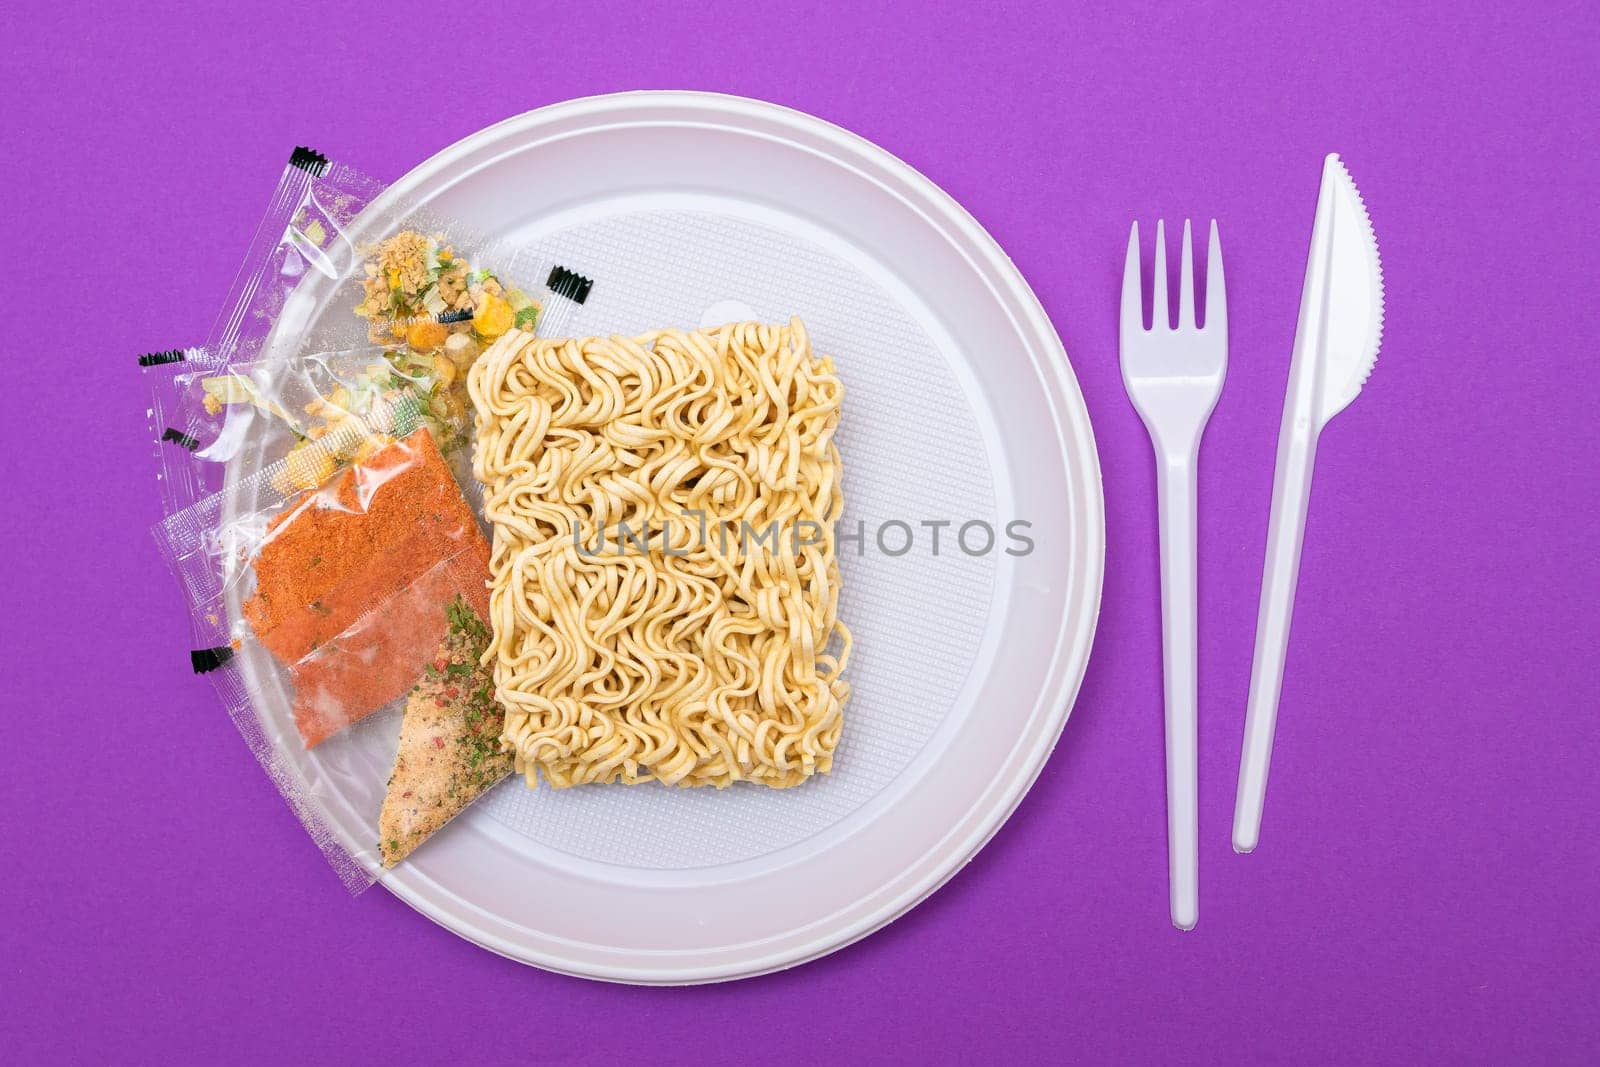 Uncooked Instant Noodles on White Plate. Raw Pasta. Dry Asian Fast Food. Quick Lunch